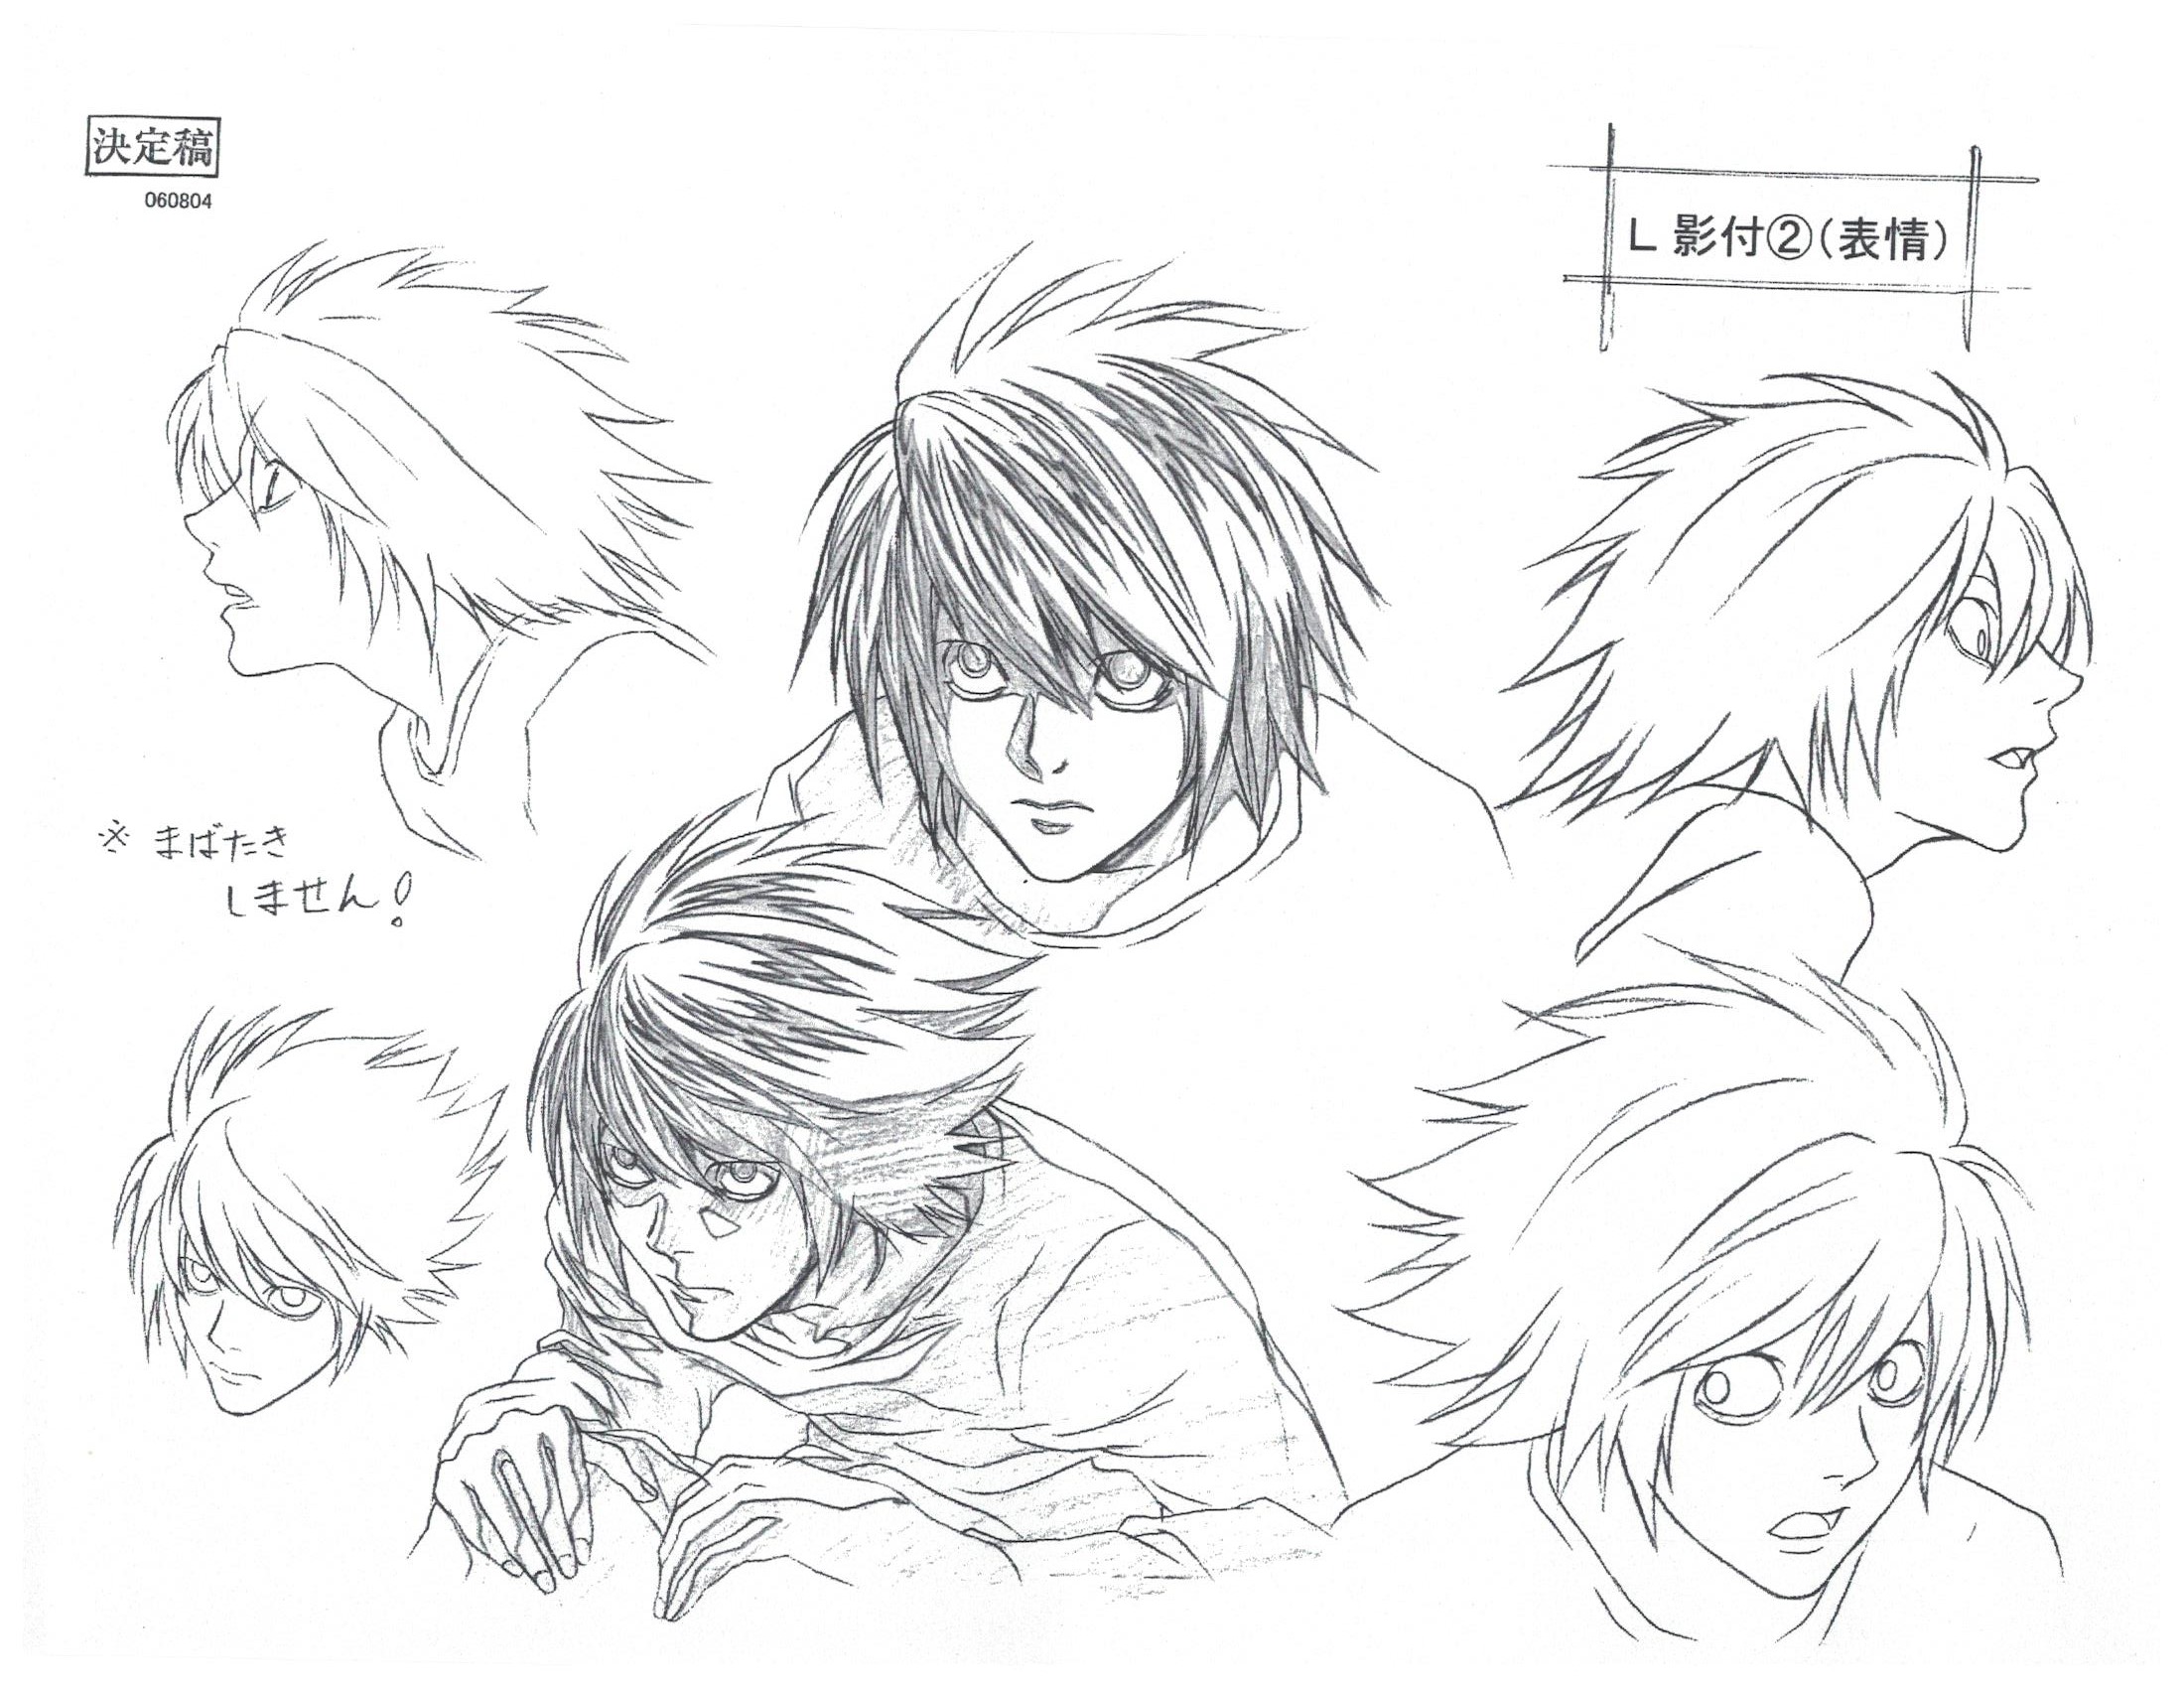 Death note L drawing by xDLava on DeviantArt